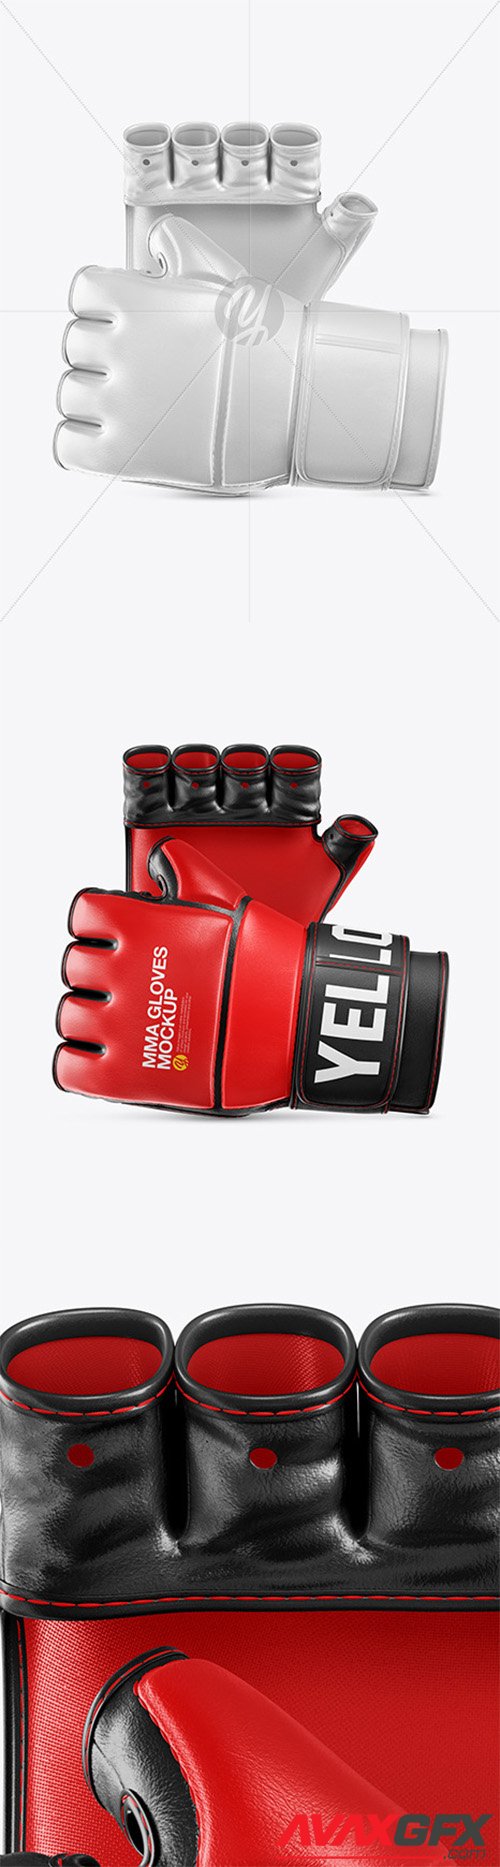 Download Two Mma Gloves Mockup 56125 Avaxgfx All Downloads That You Need In One Place Graphic From Nitroflare Rapidgator